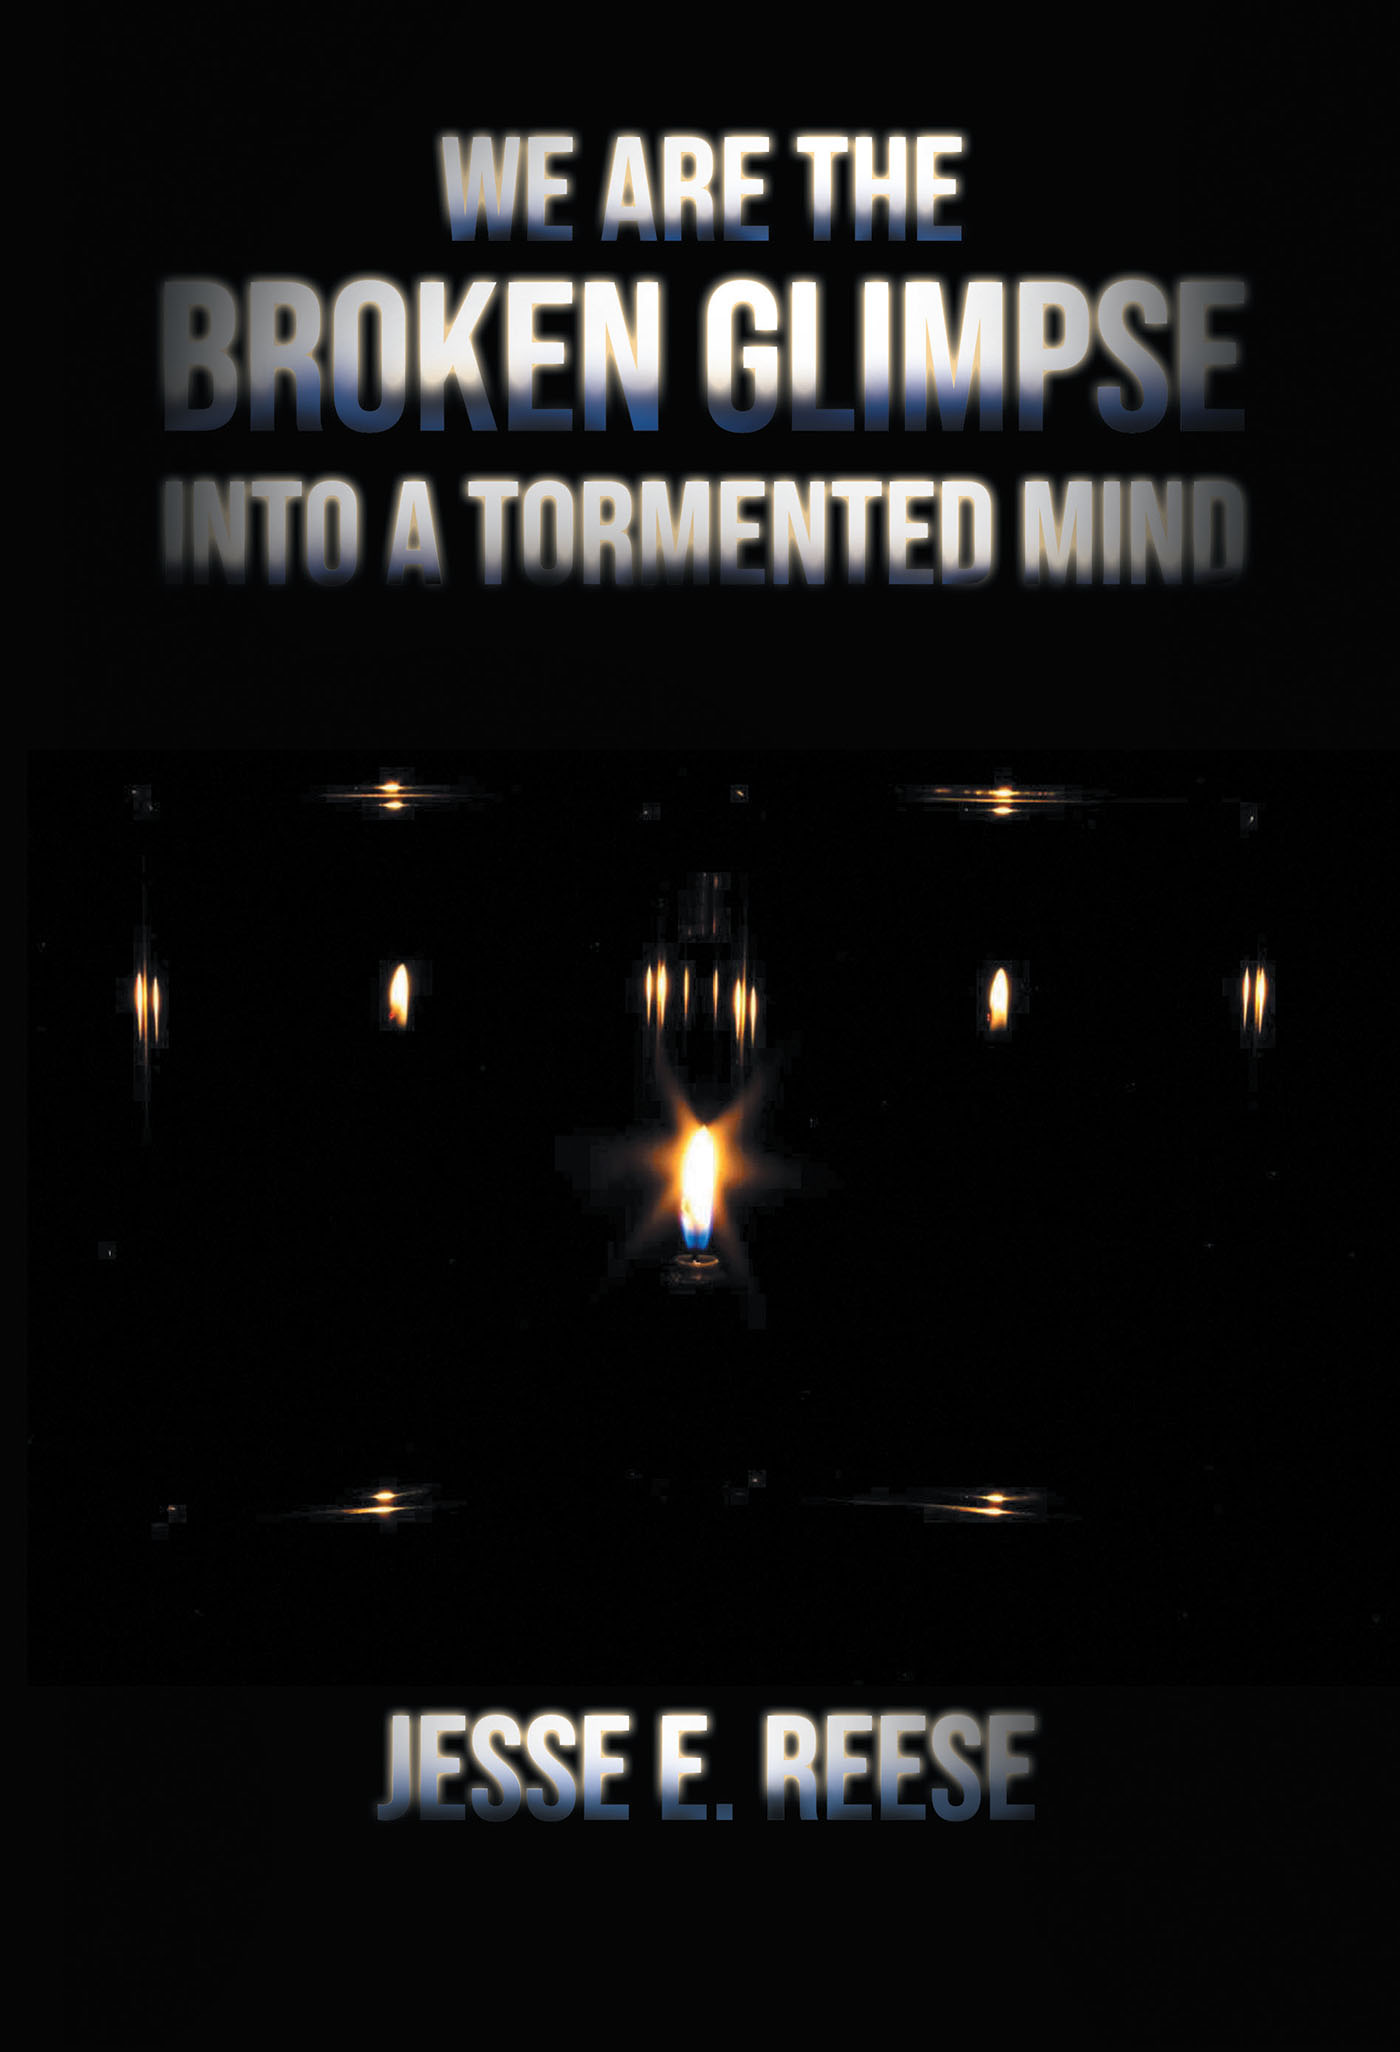 We Are the Broken Glimpse into a Tormented Mind Cover Image